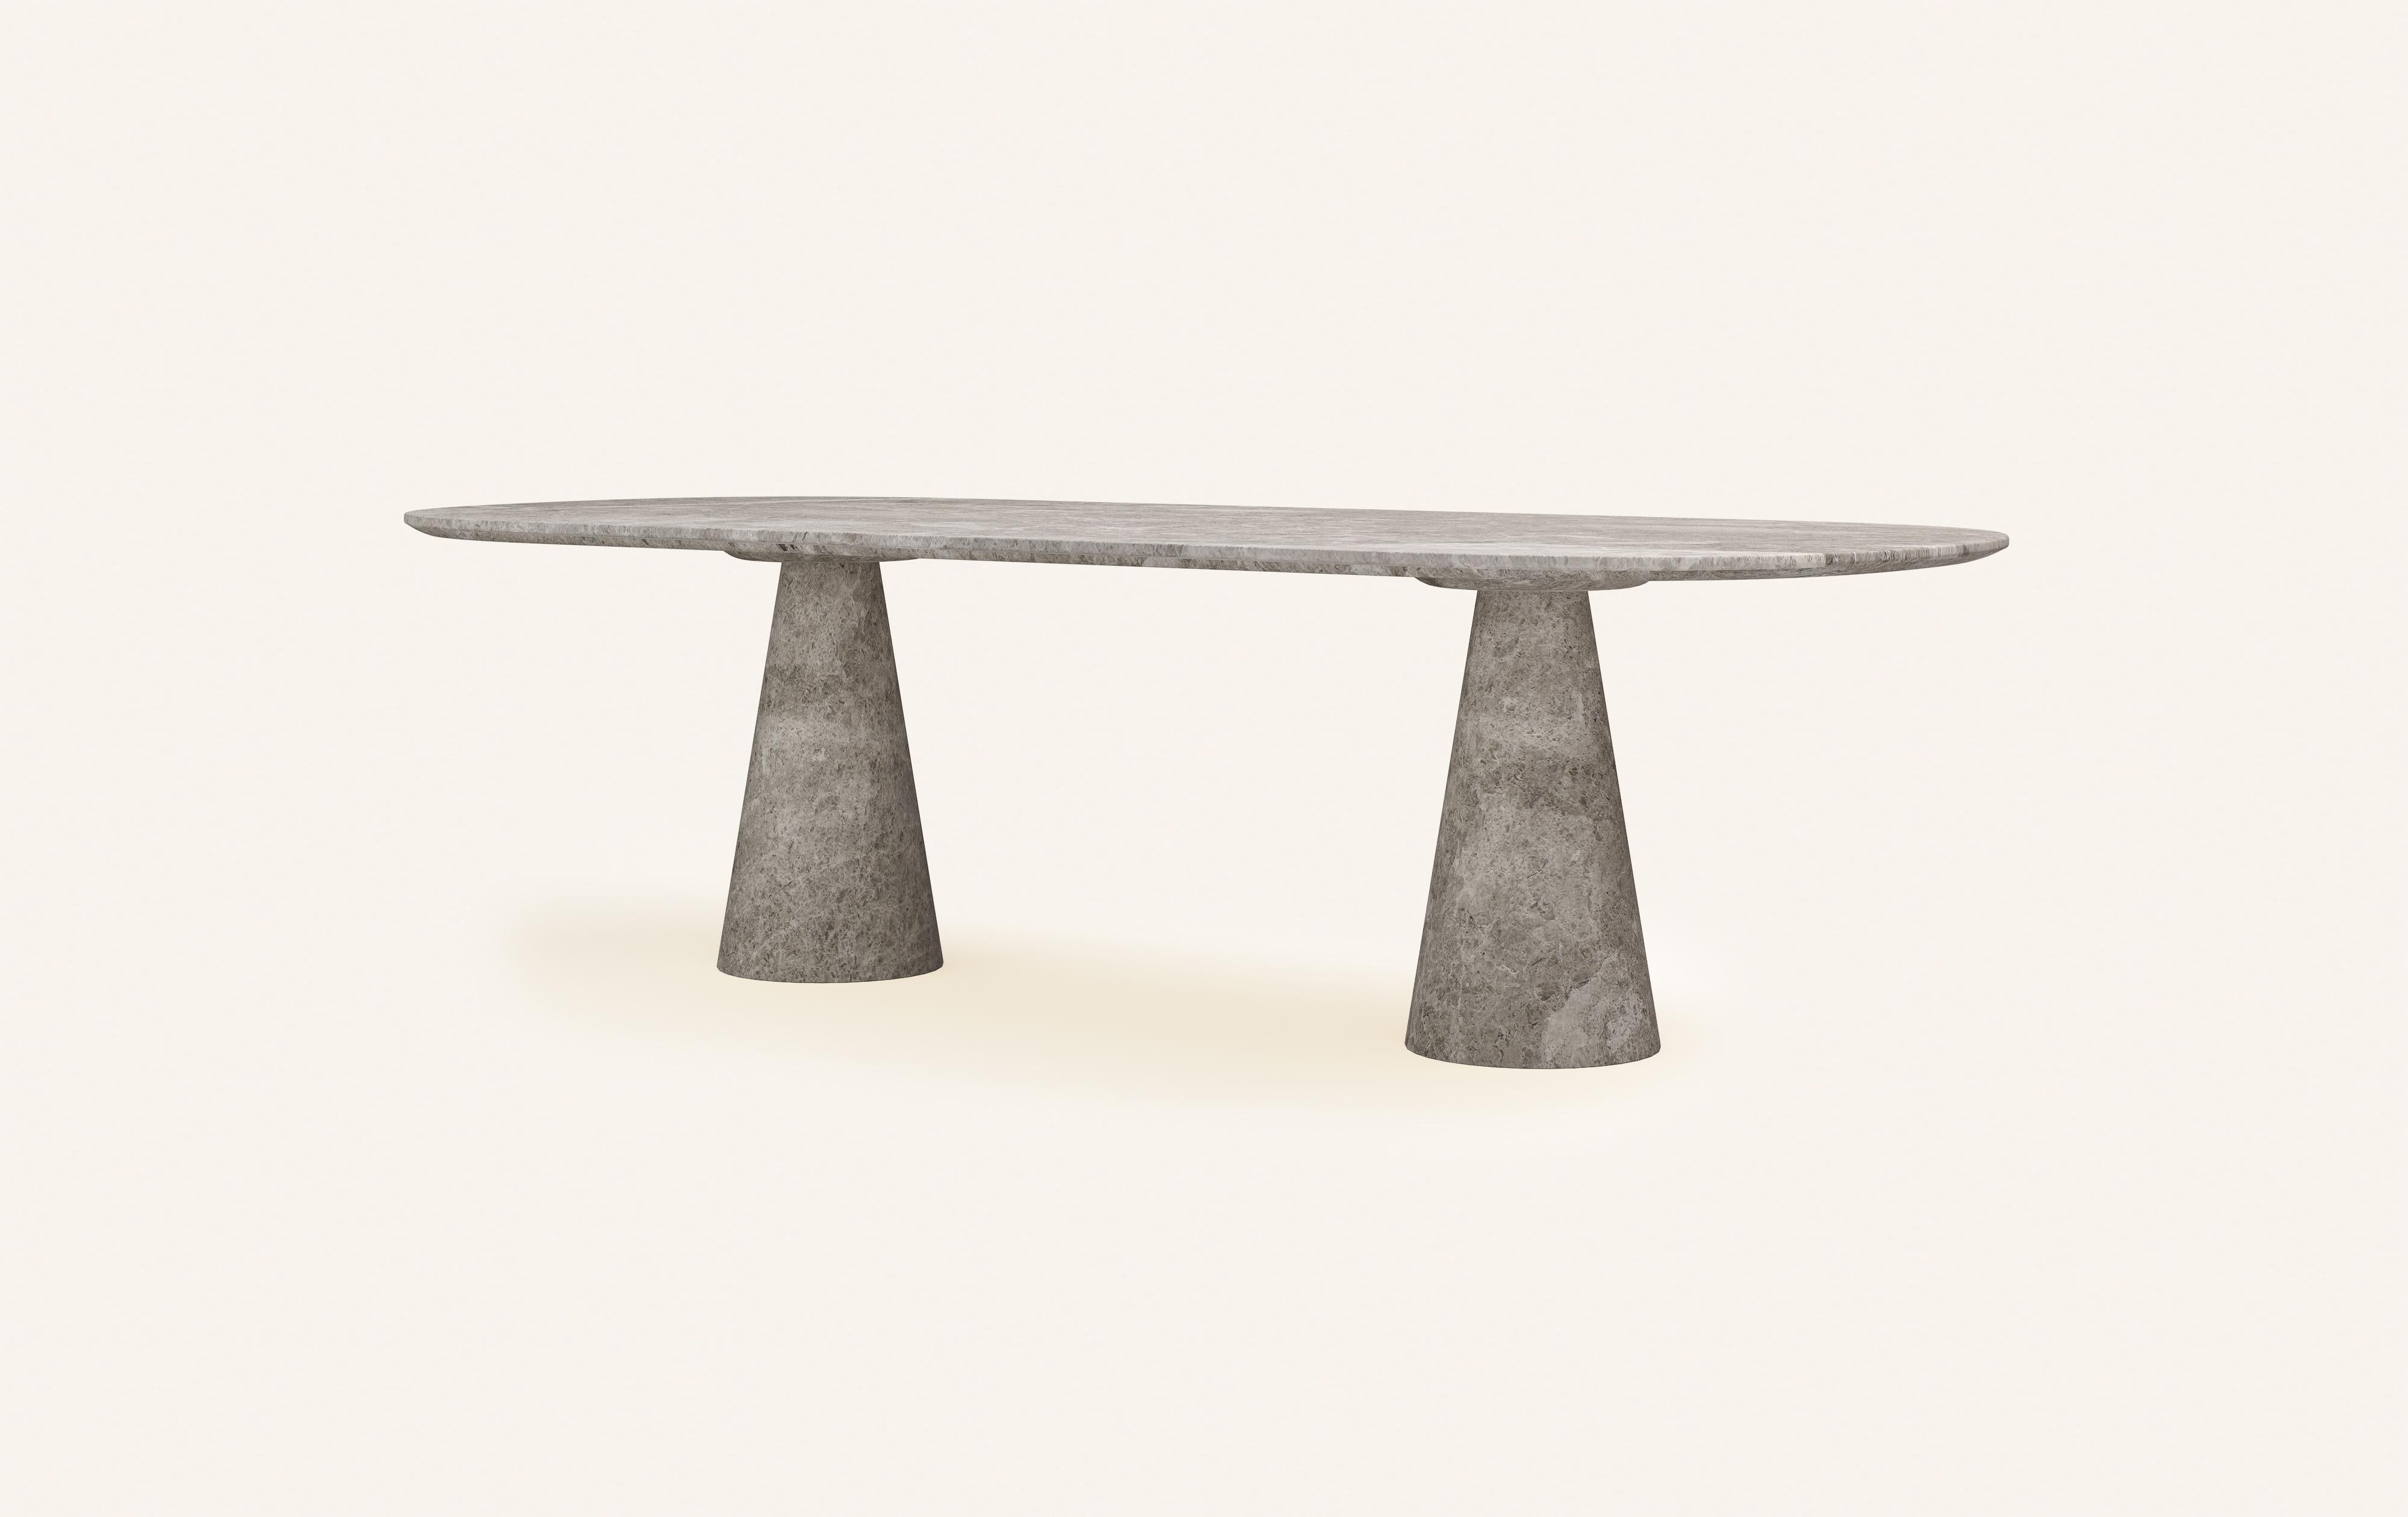 Organic Modern FORM(LA) Cono Oval Dining Table 108”L x 48”W x 30”H Tundra Gray Marble For Sale